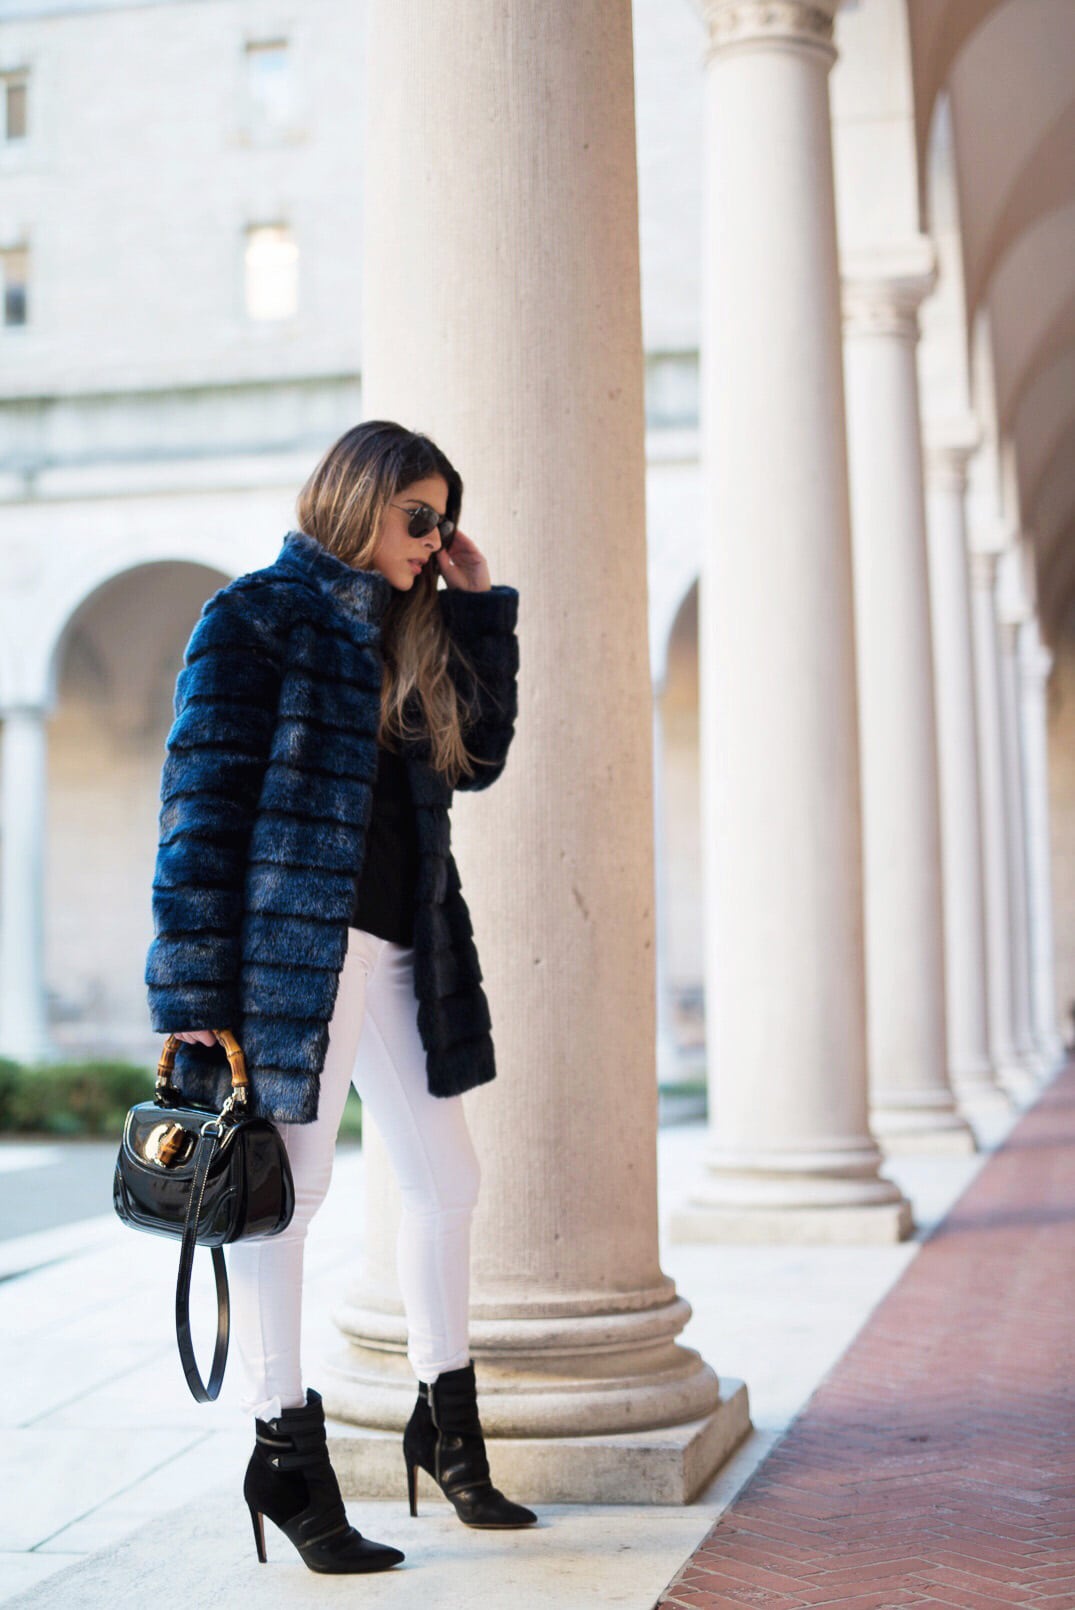 life with aco, flared pants, gucci bag, wool coat winter outfit